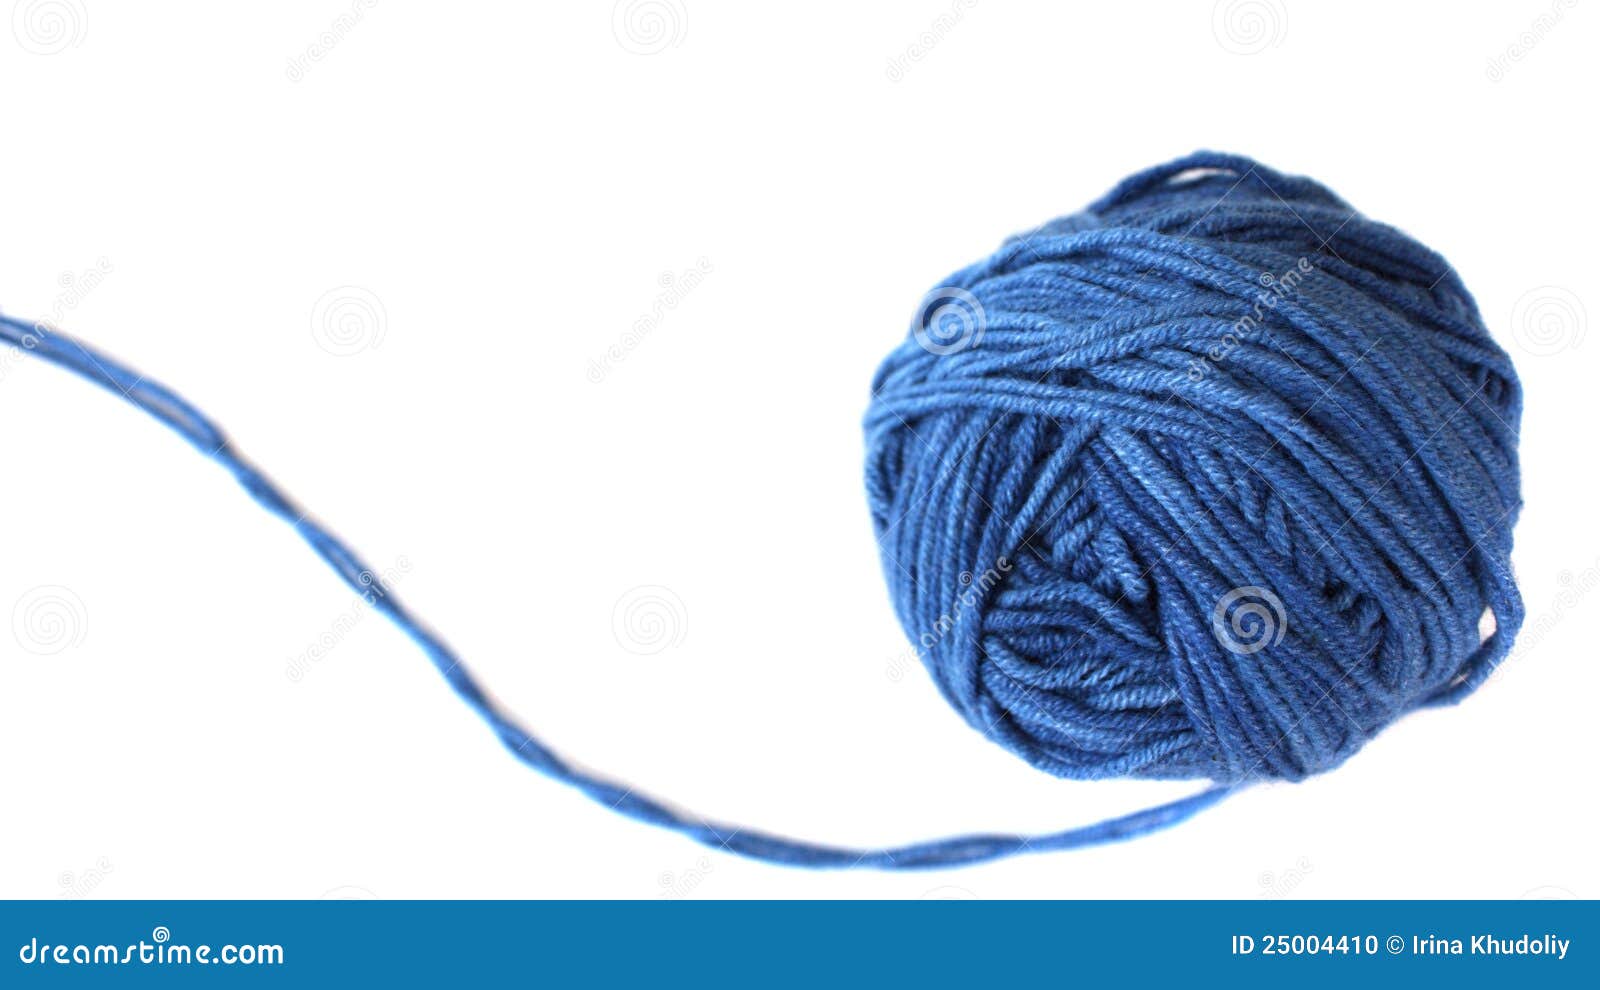 Ball of blue yarn stock photo. Image of wool, blue, notes - 25004410